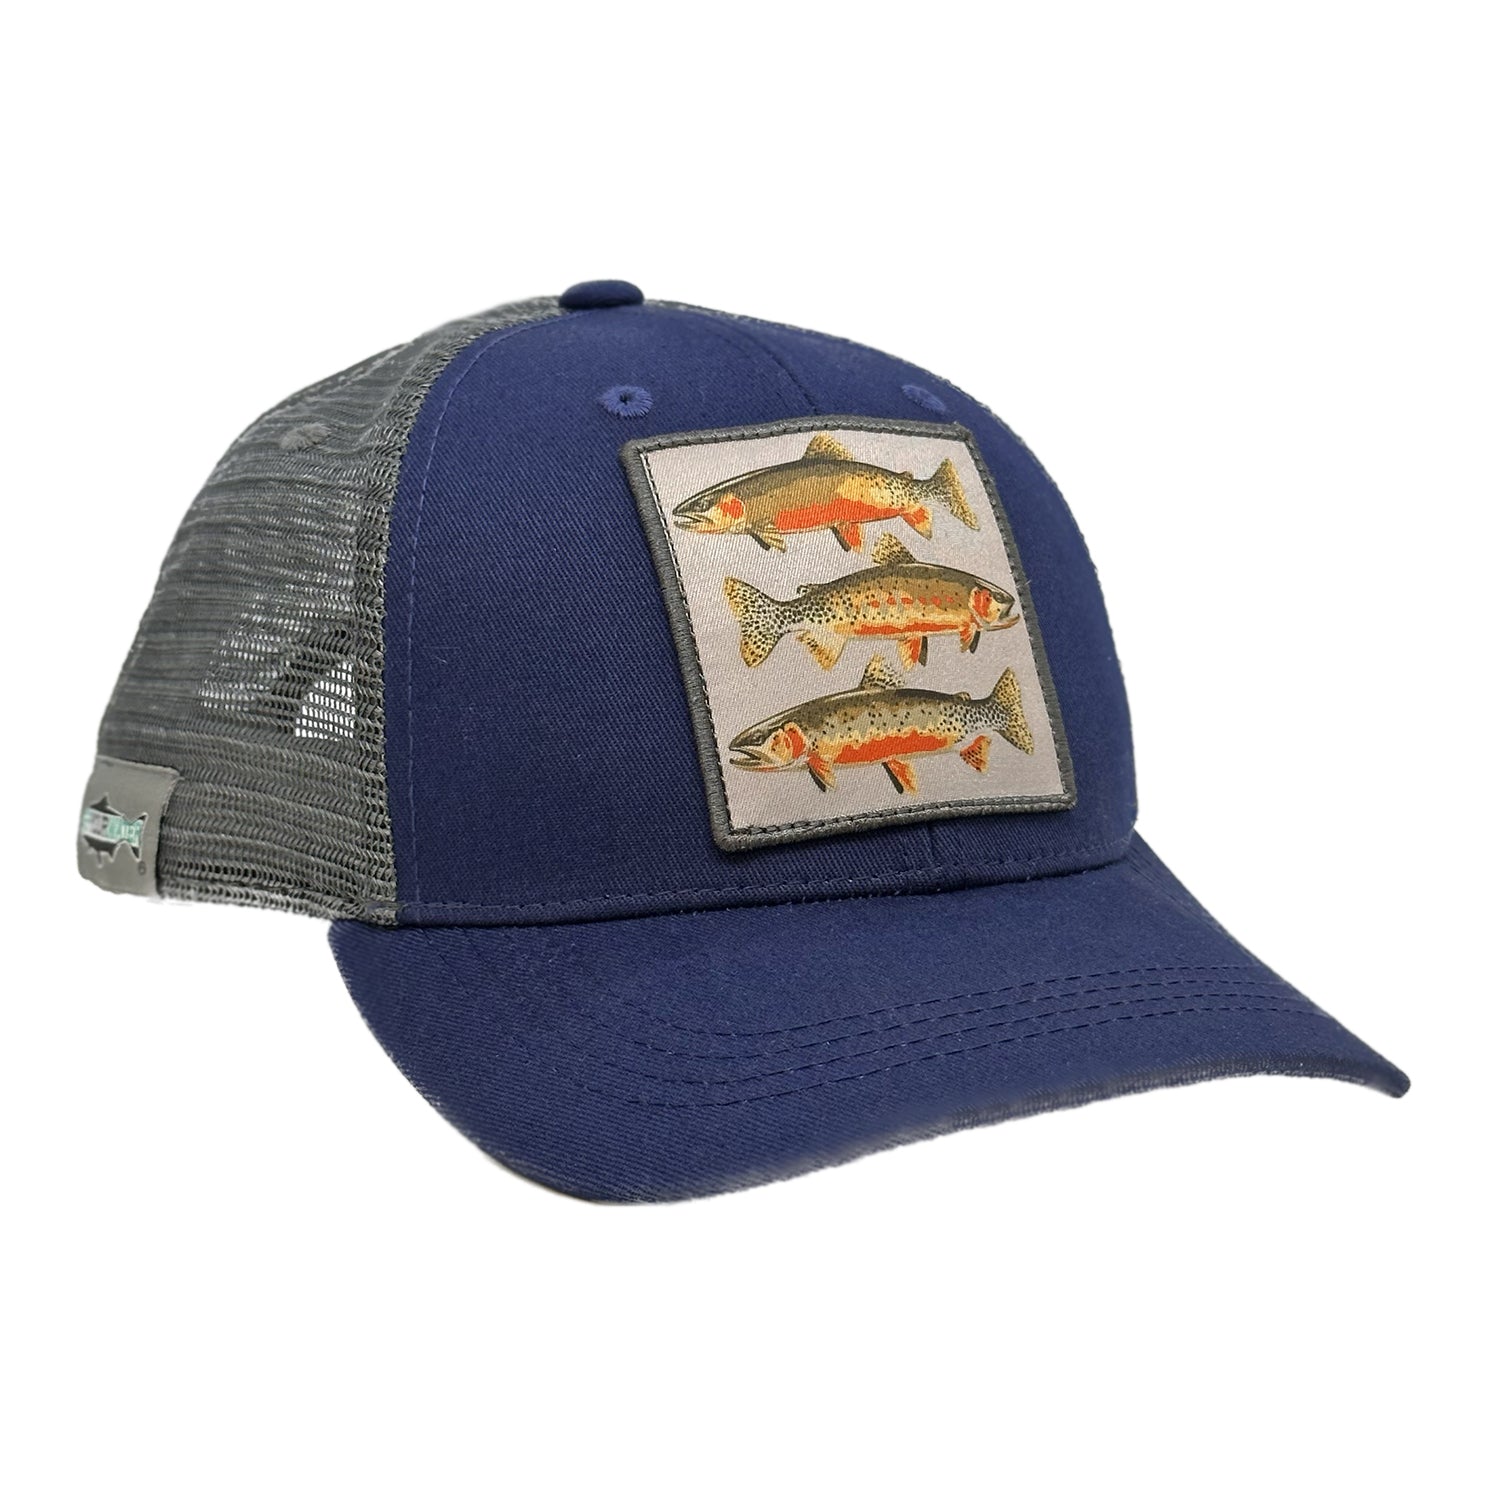 A navy front dark gray mesh back hat with a patch of three cutthroat trout